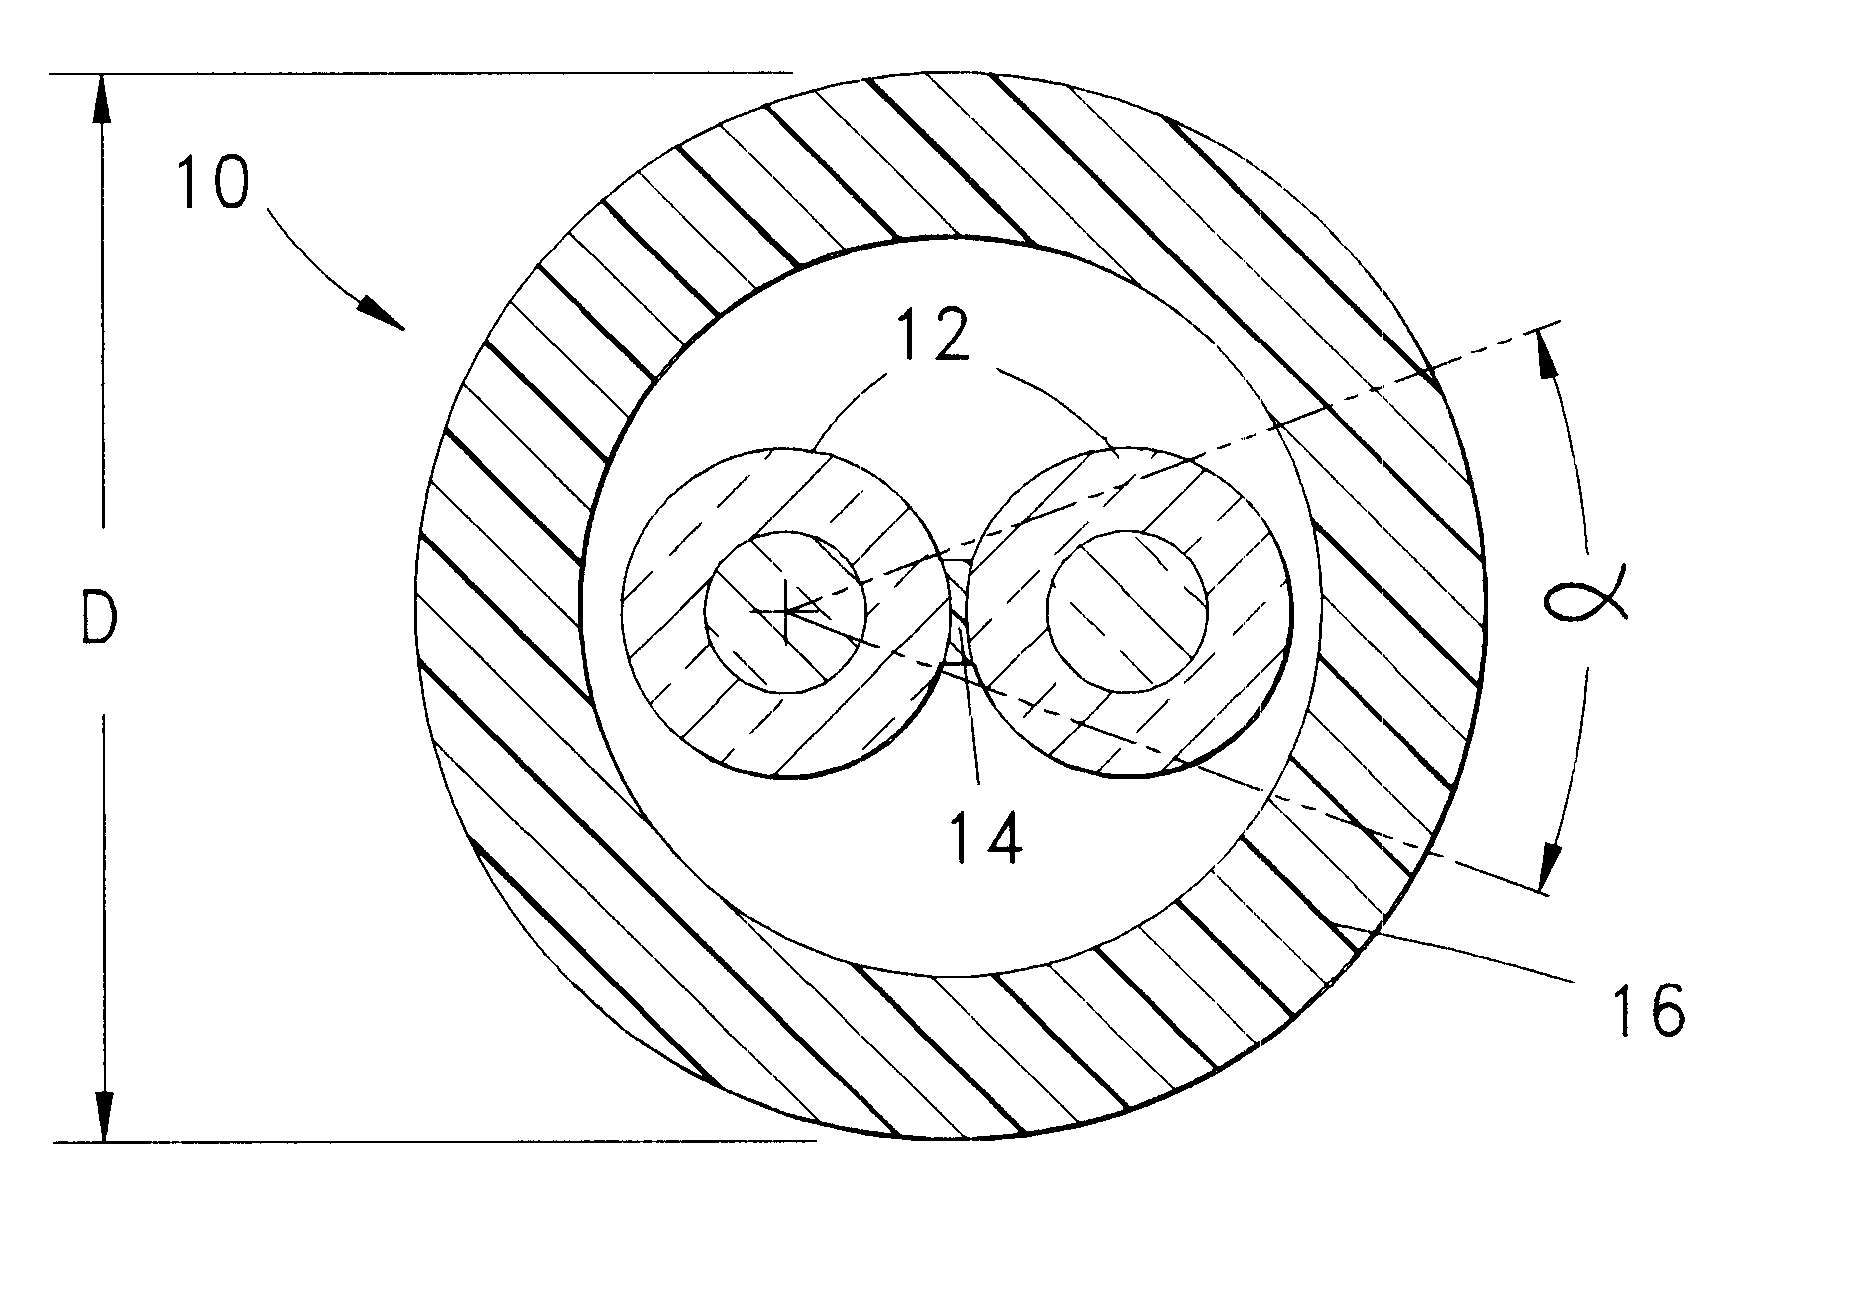 Fiber optic assembly and method of making same